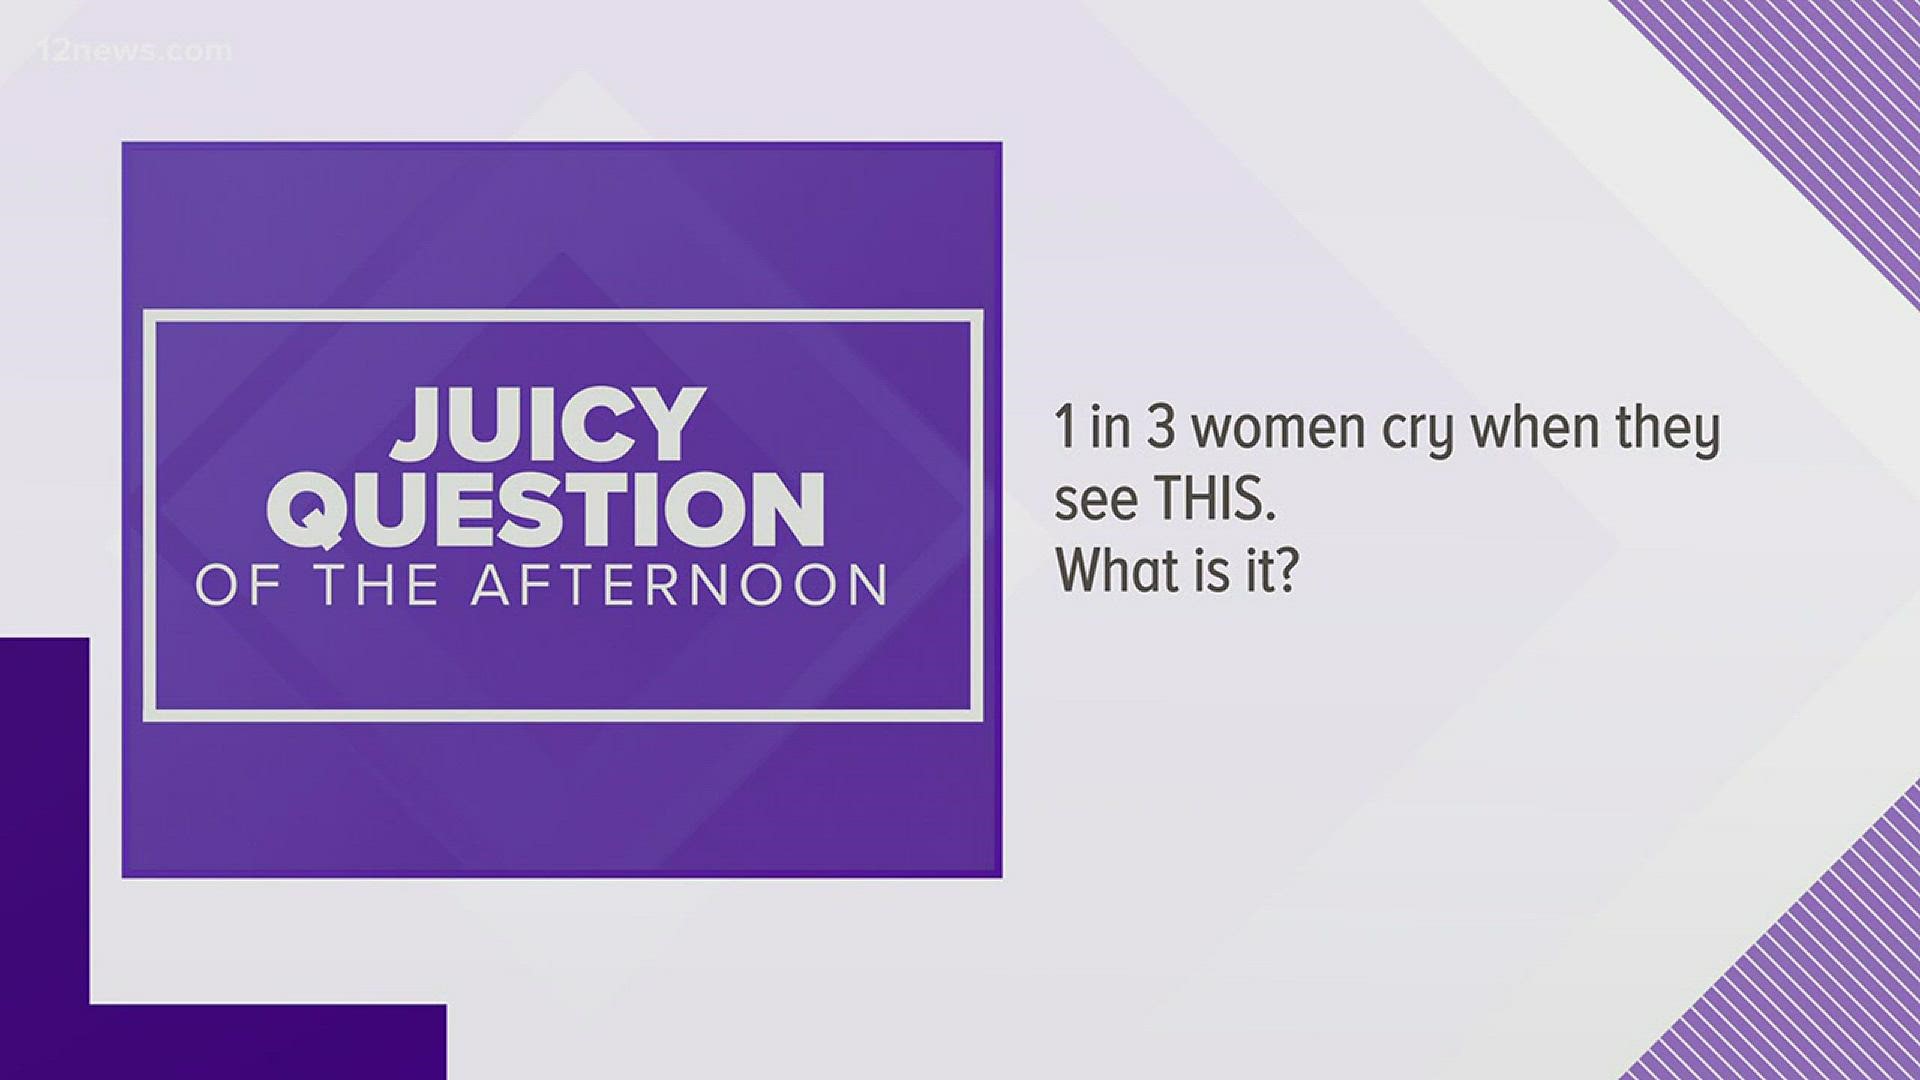 1 in 3 women cry when they see THIS. What is it? It's our Juicy Question of the Afternoon.